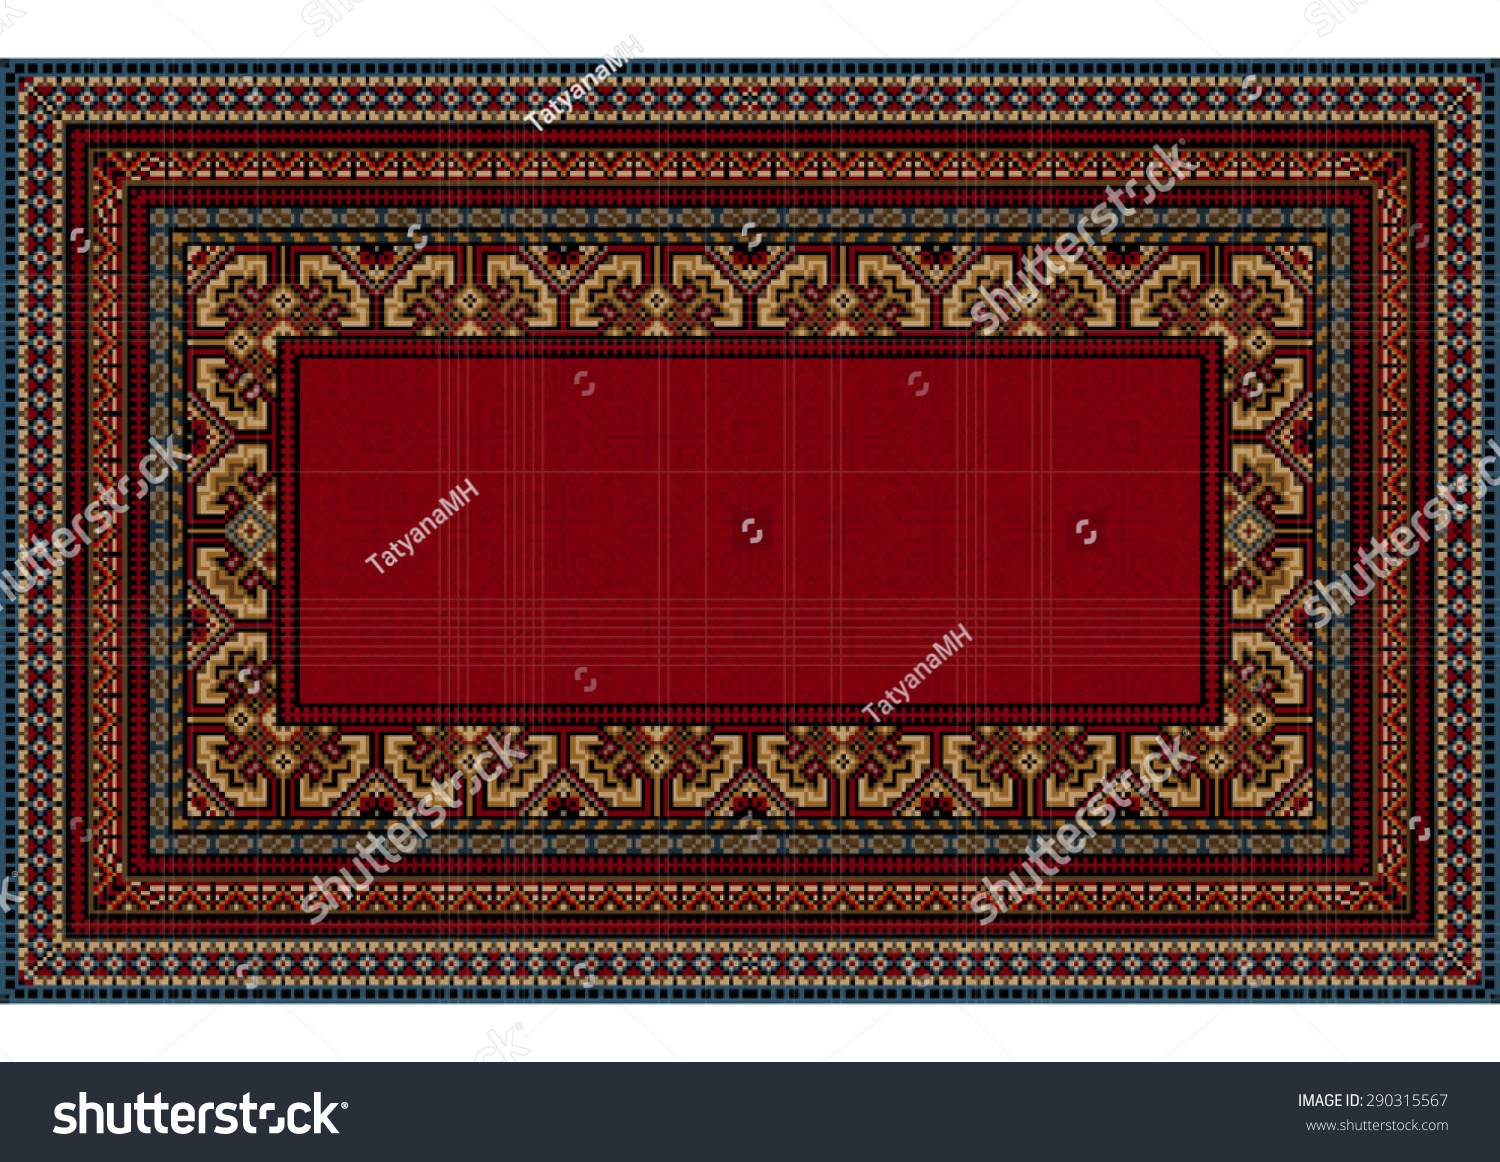 SVG of Bright pattern of the carpet with motley border and a red center in the old style svg